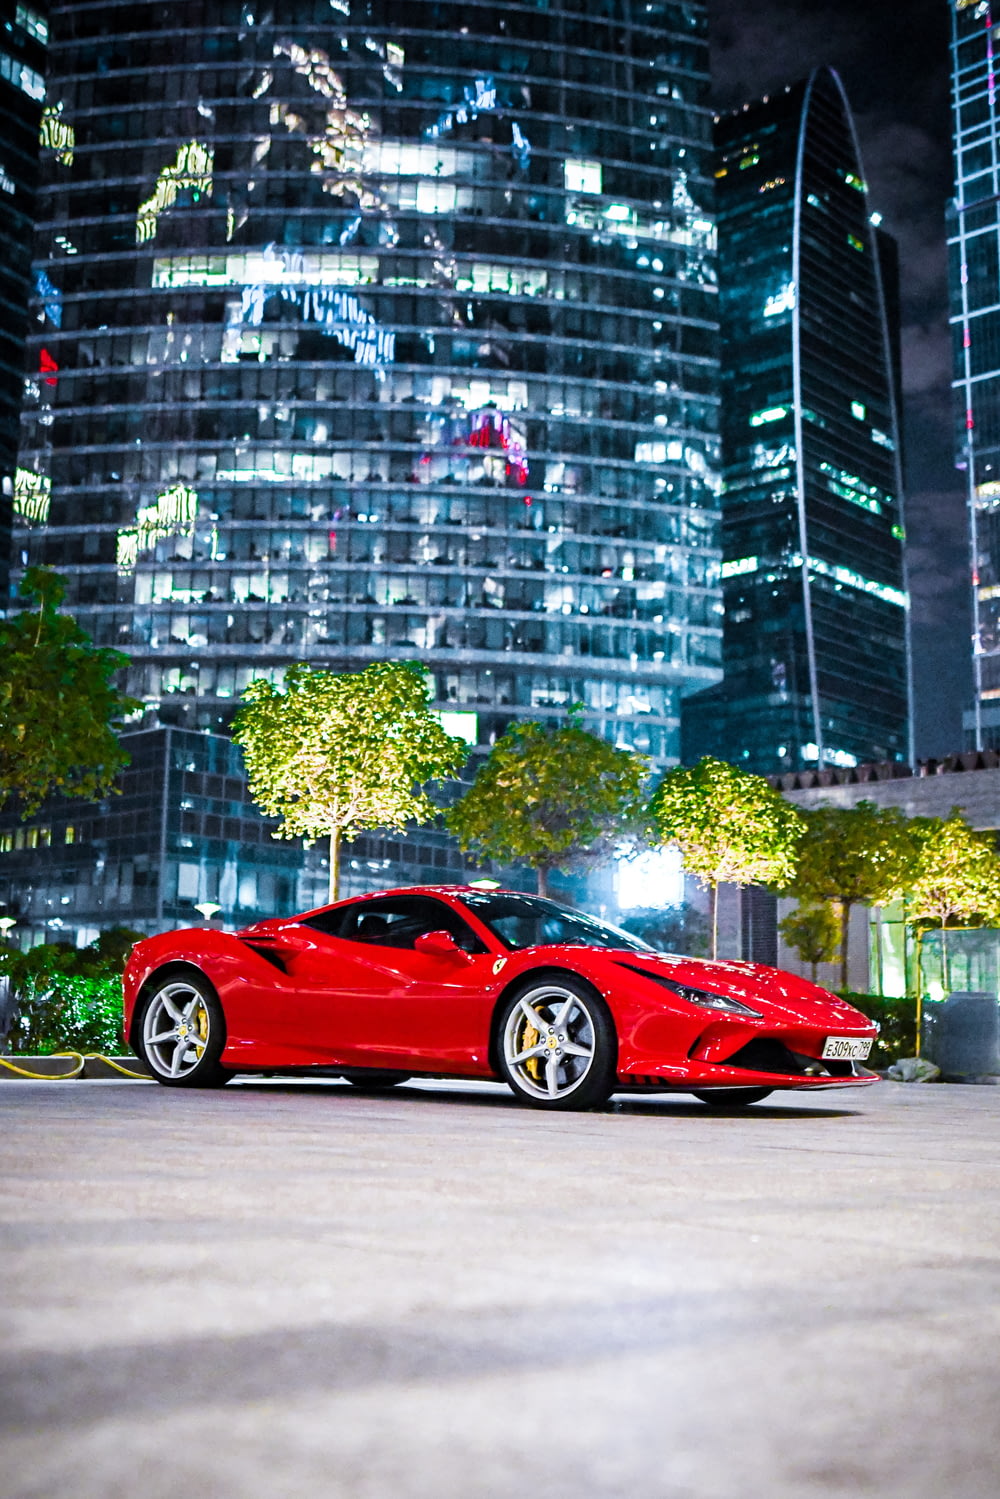 a red sports car parked in front of a tall building